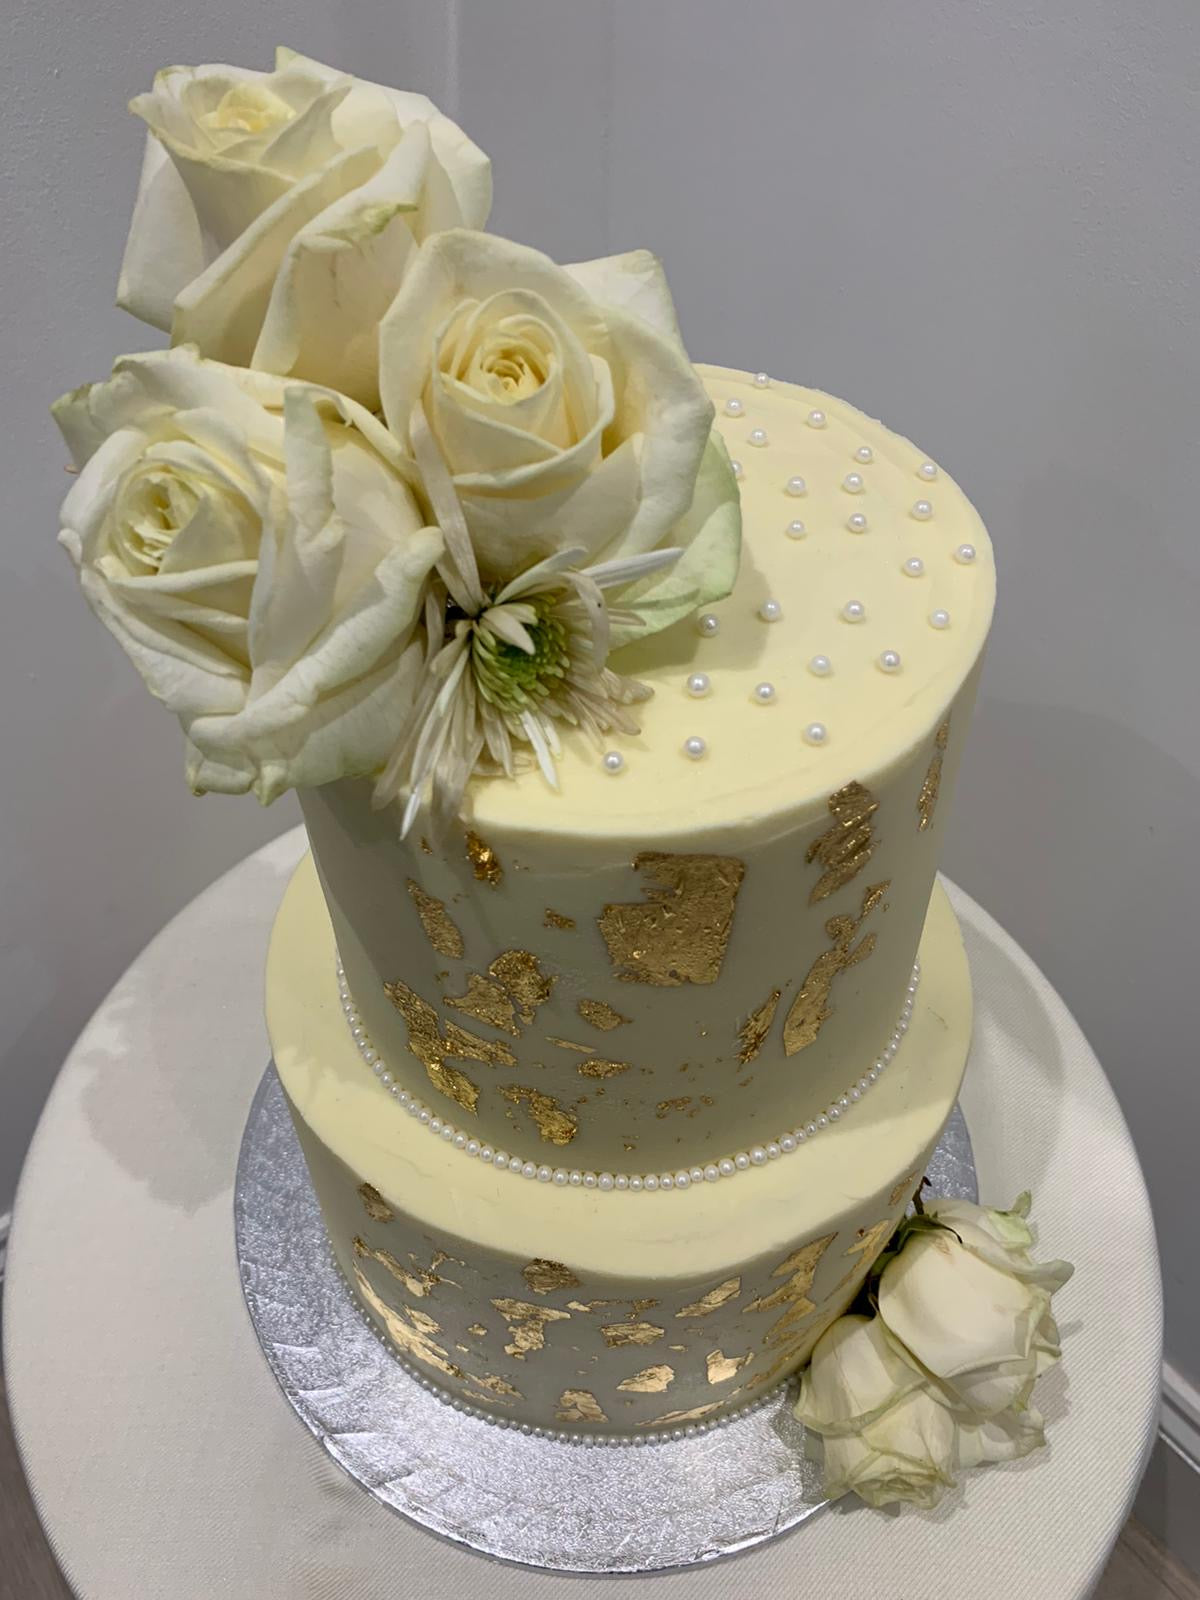 Yellow & White Rosette Cake 😍❤️ - Mitchy's Sweet Bugs | Facebook